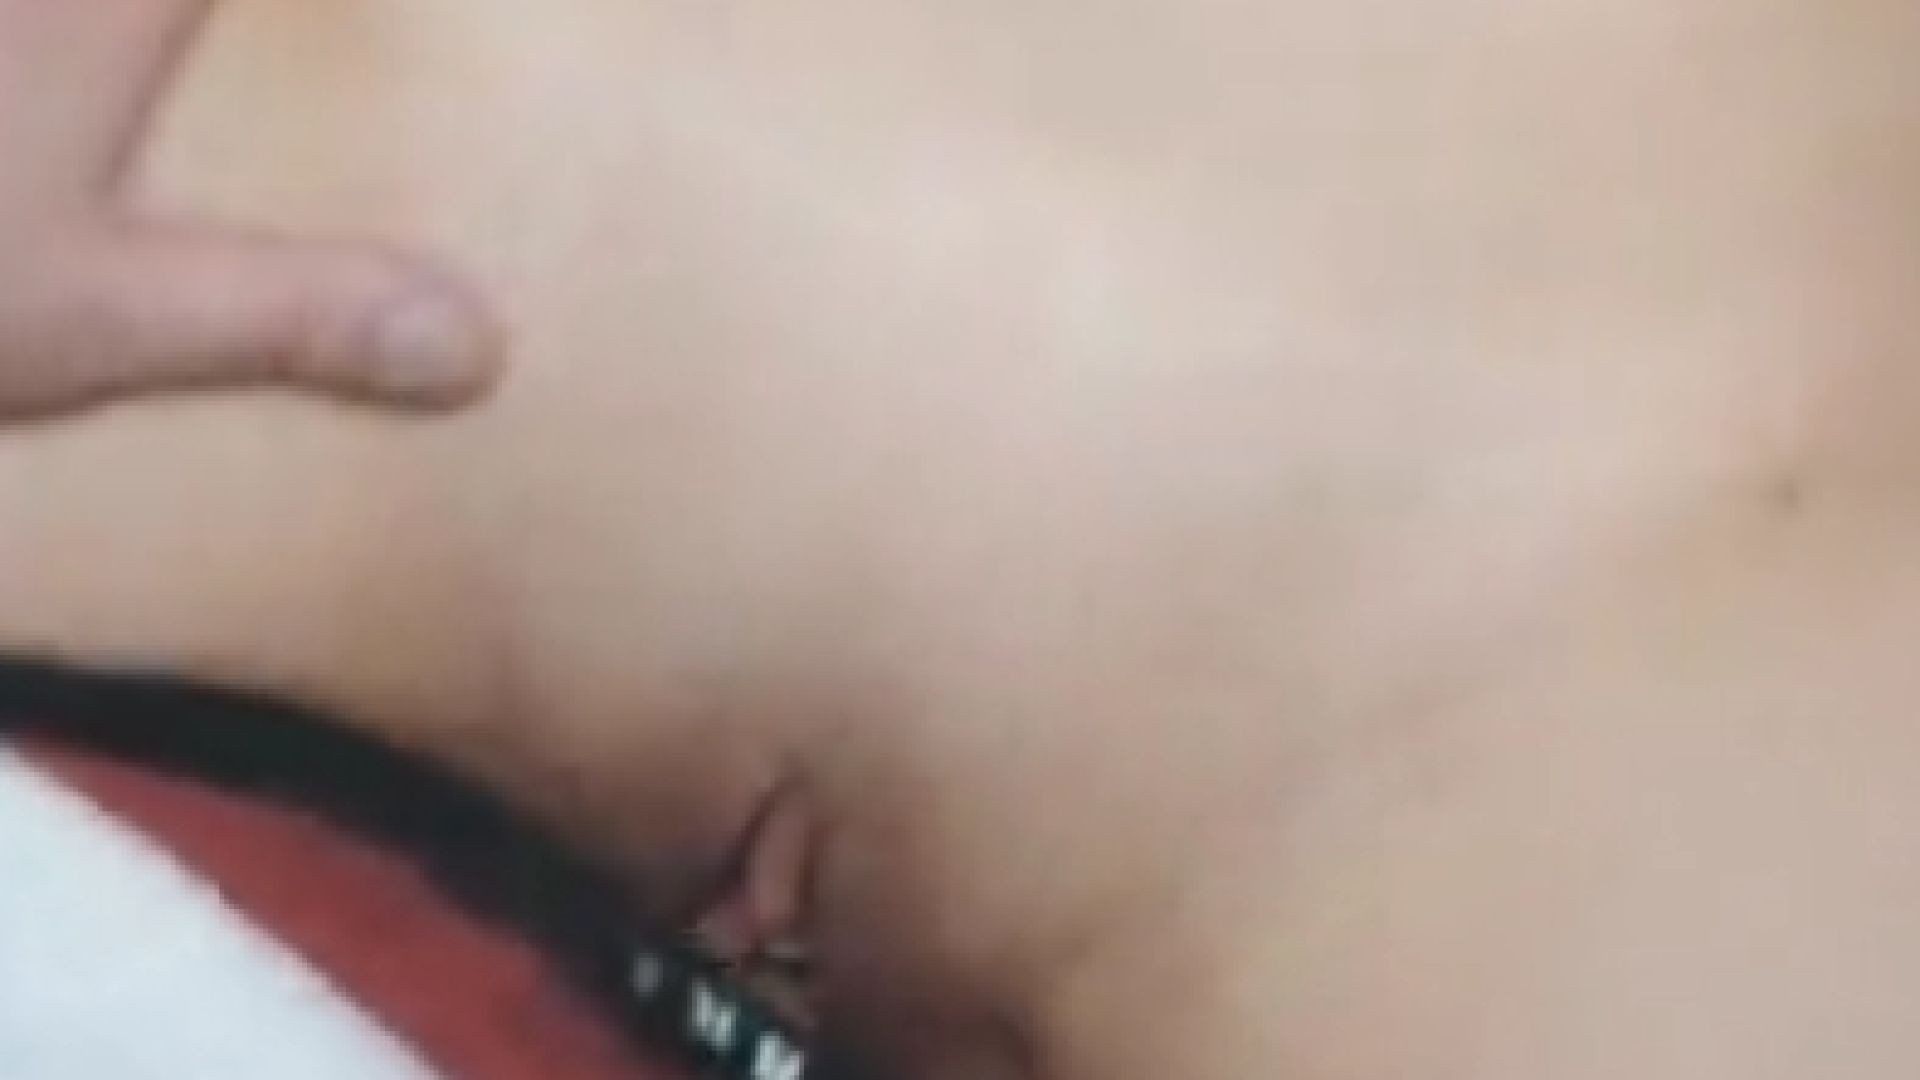 An 18 year old cutie got stuck in bed and was fucked half-assed